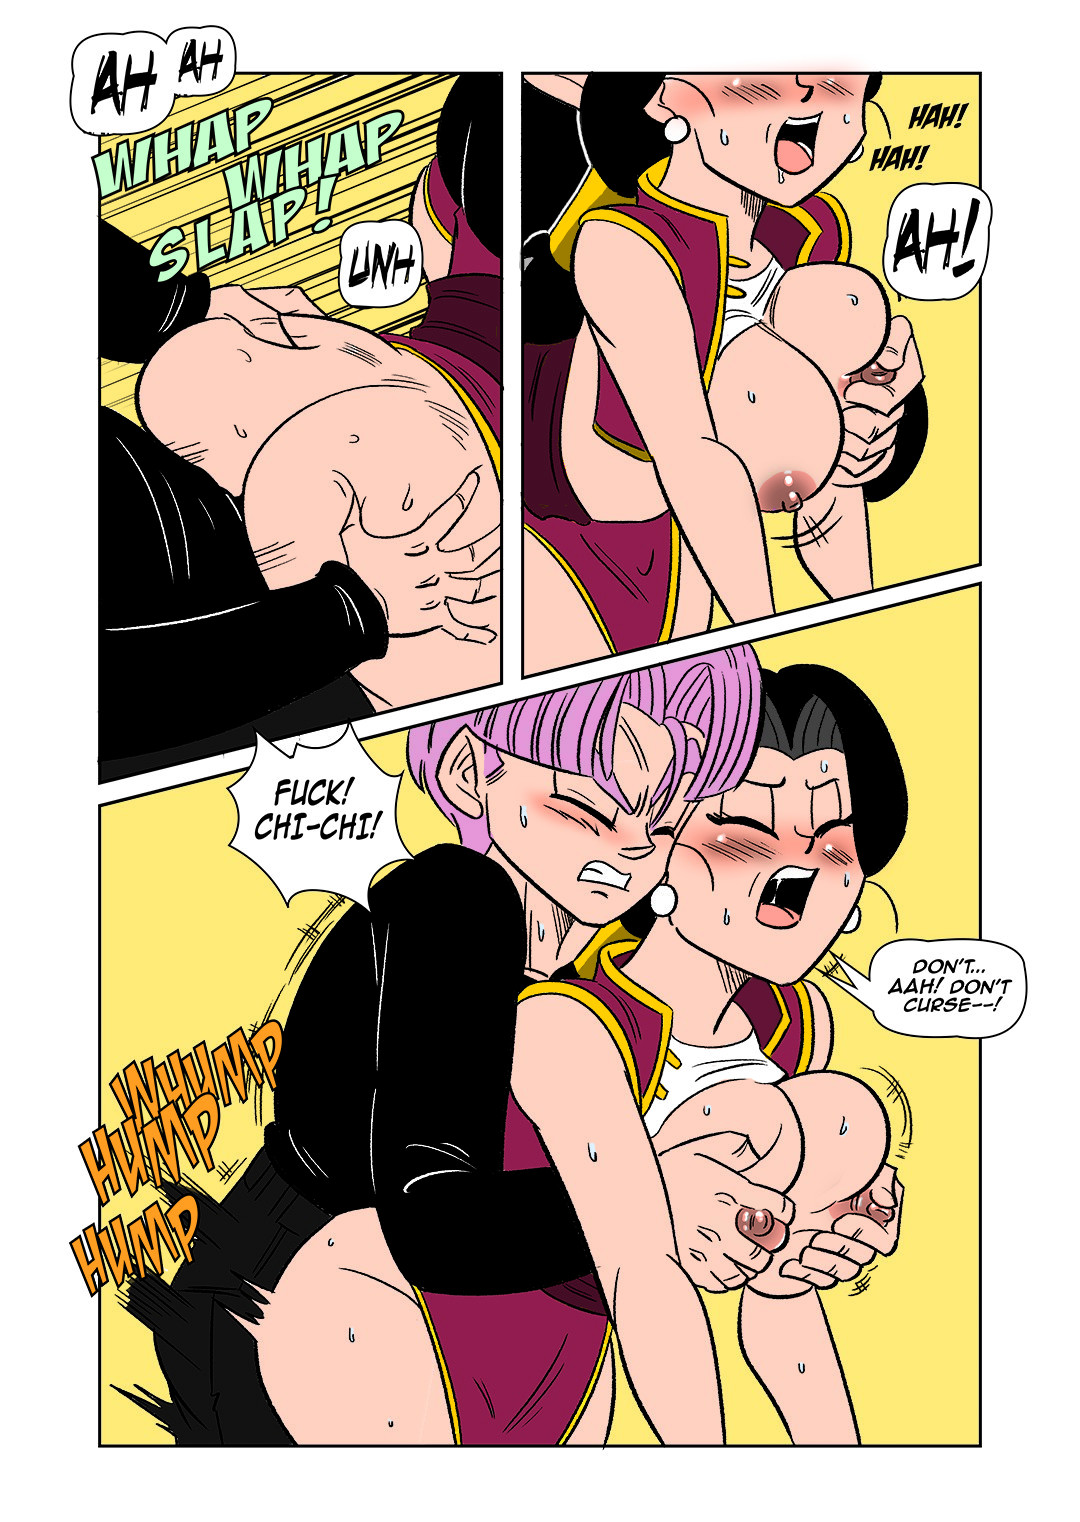 The Switch Up - Dragon Ball Z by Funsexydb [Color]